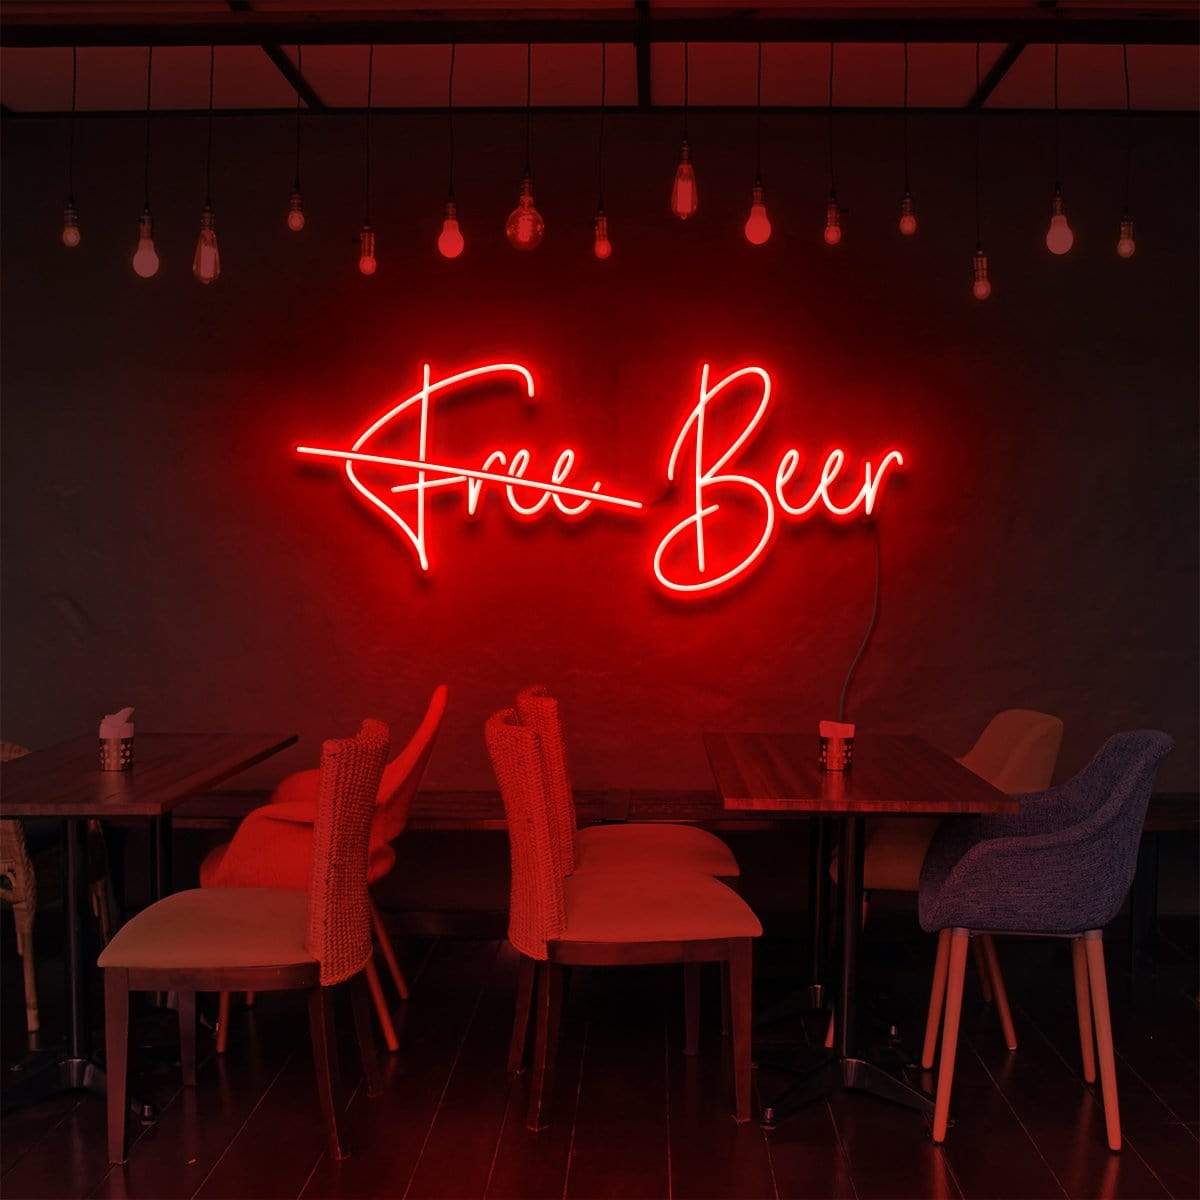 "Free Beer" Neon Sign for Bars & Restaurants 60cm (2ft) / Red / LED Neon by Neon Icons